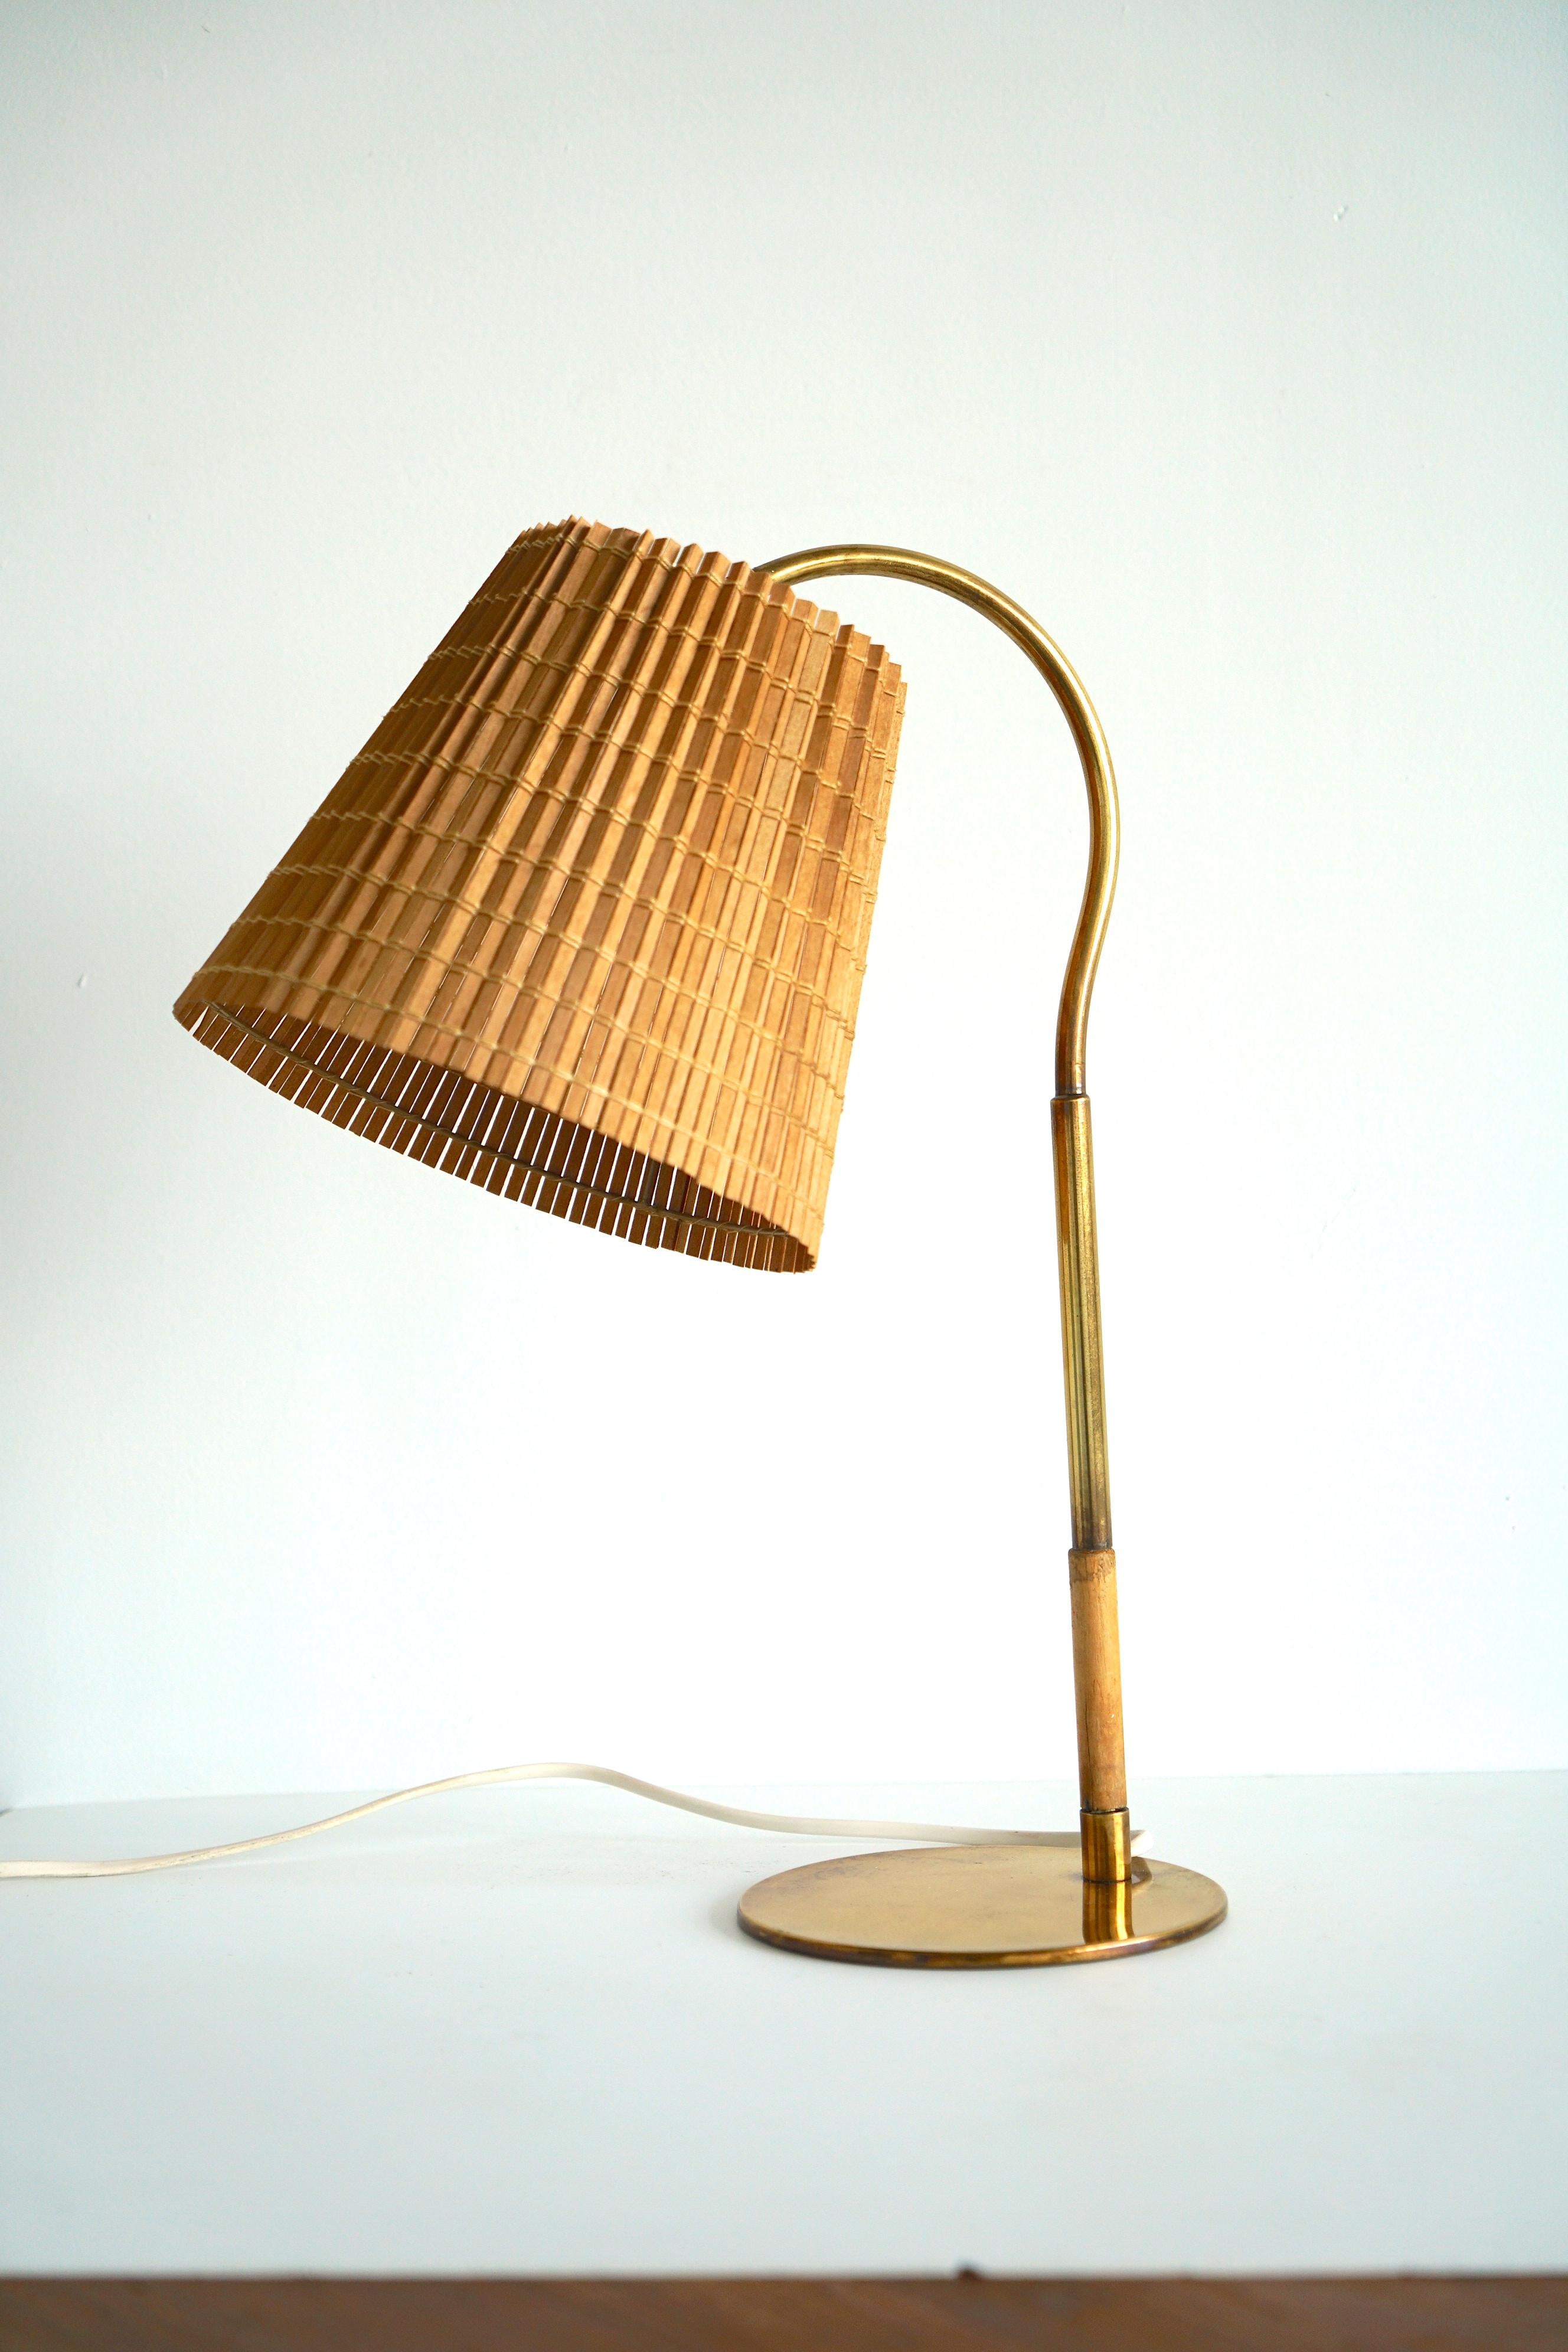 Scandinavian Modern A table lamp by Paavo Tynell, model 9201 / 2 available. For Sale